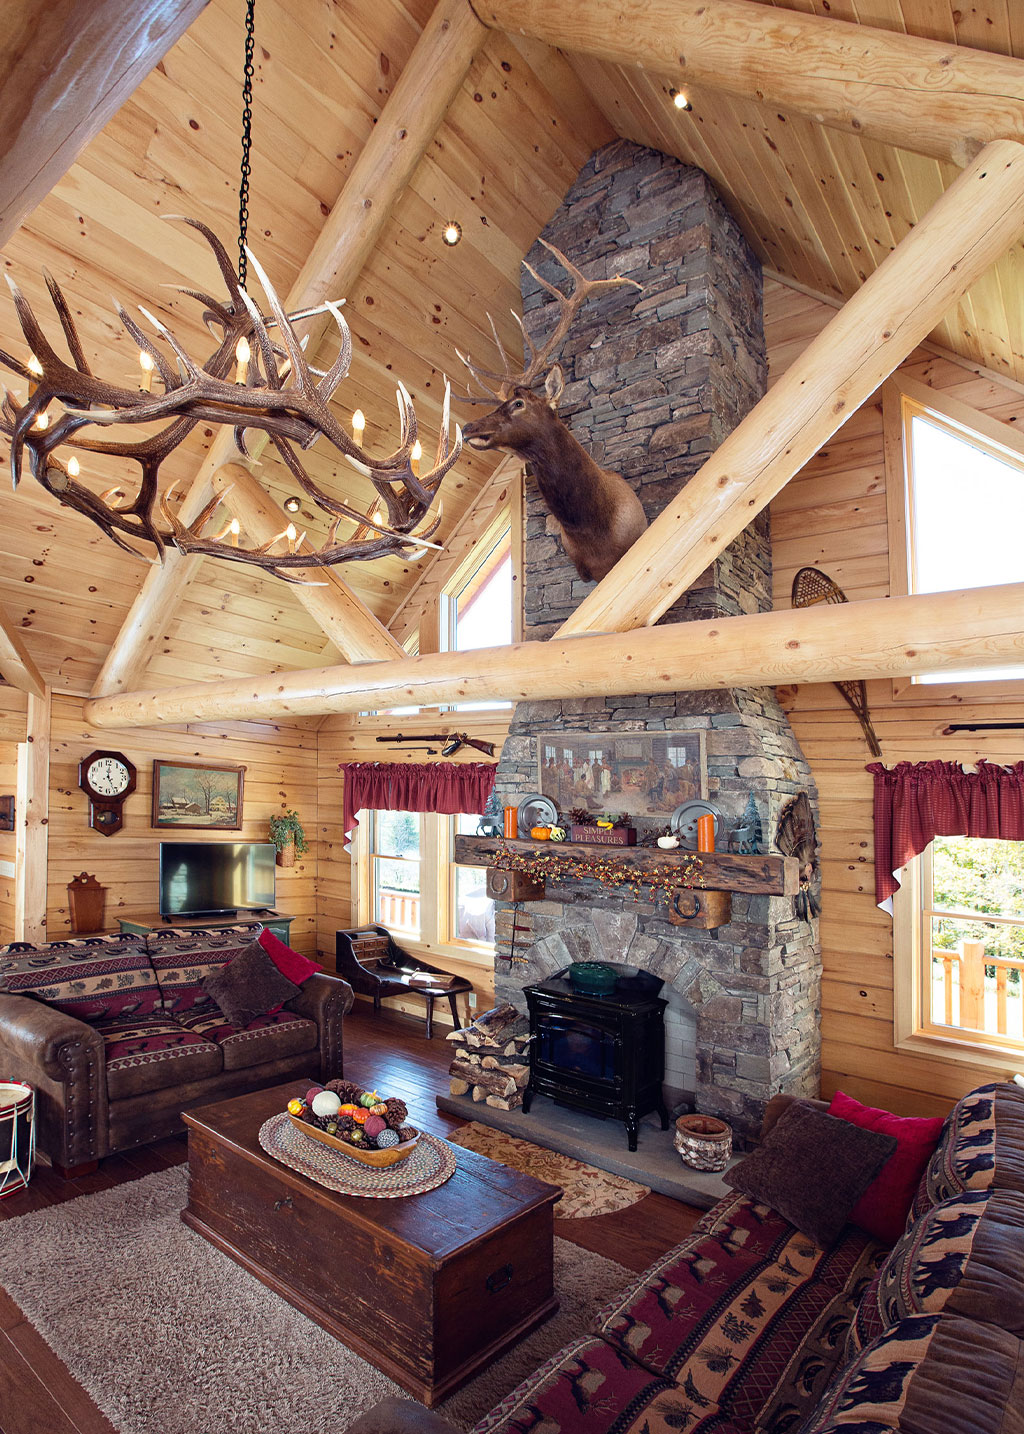 Beaver Mountain Log Homes Mountainview Log Home Living Space and Timber Trusses